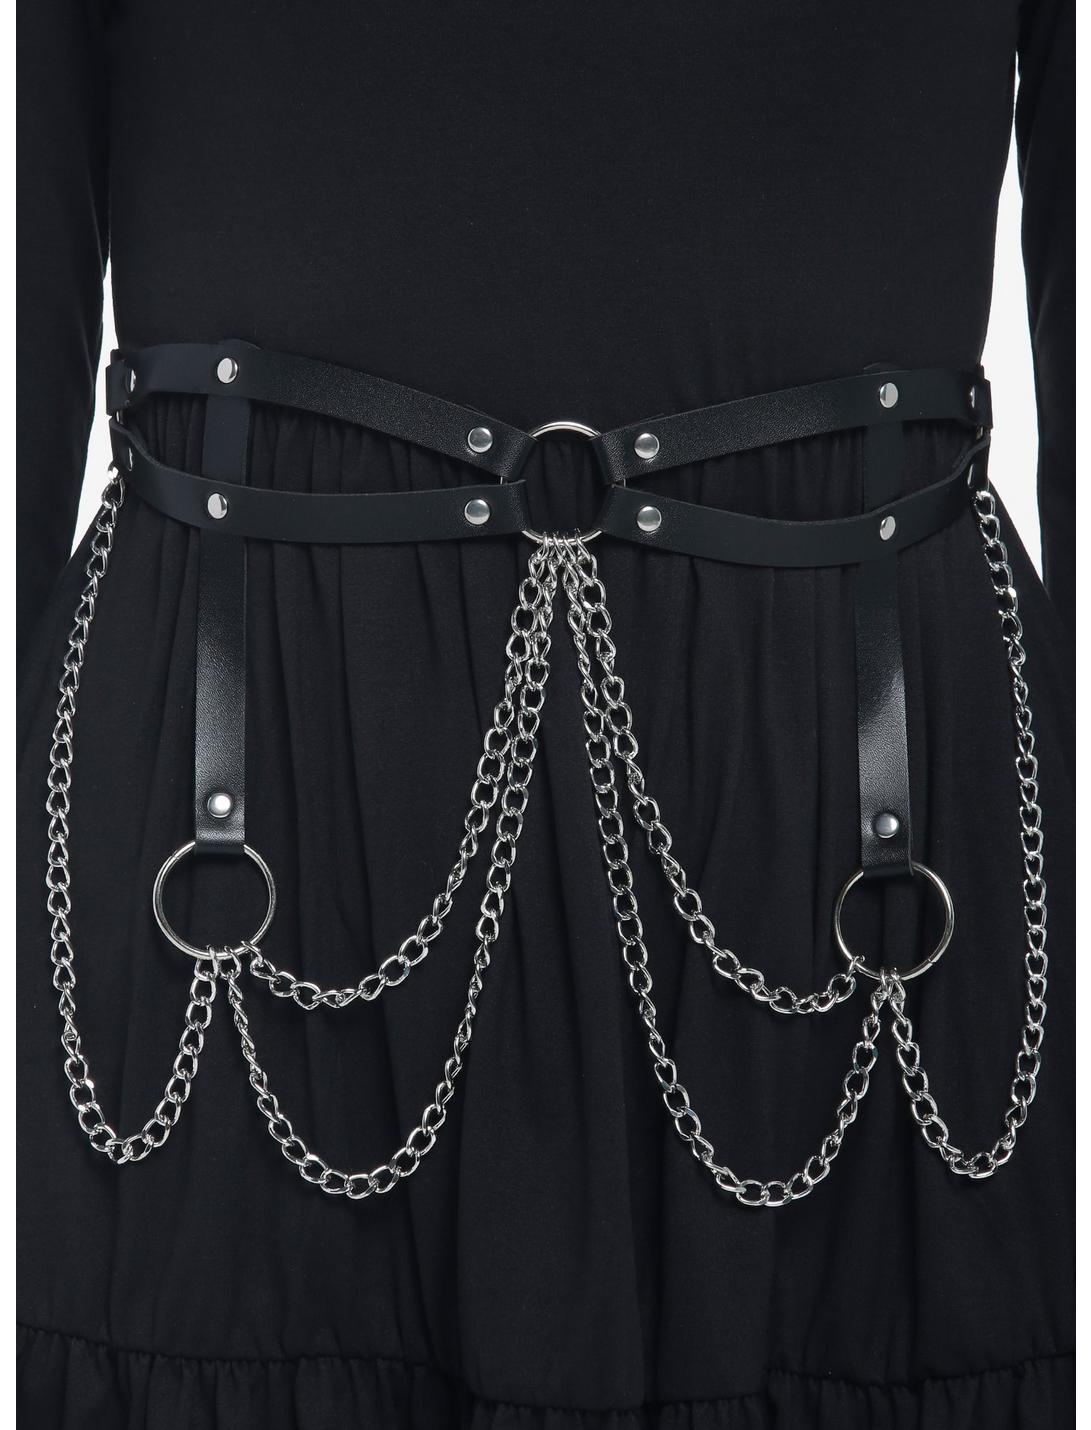 Multi Chain O-Ring Harness Style Belt, BLACK, hi-res